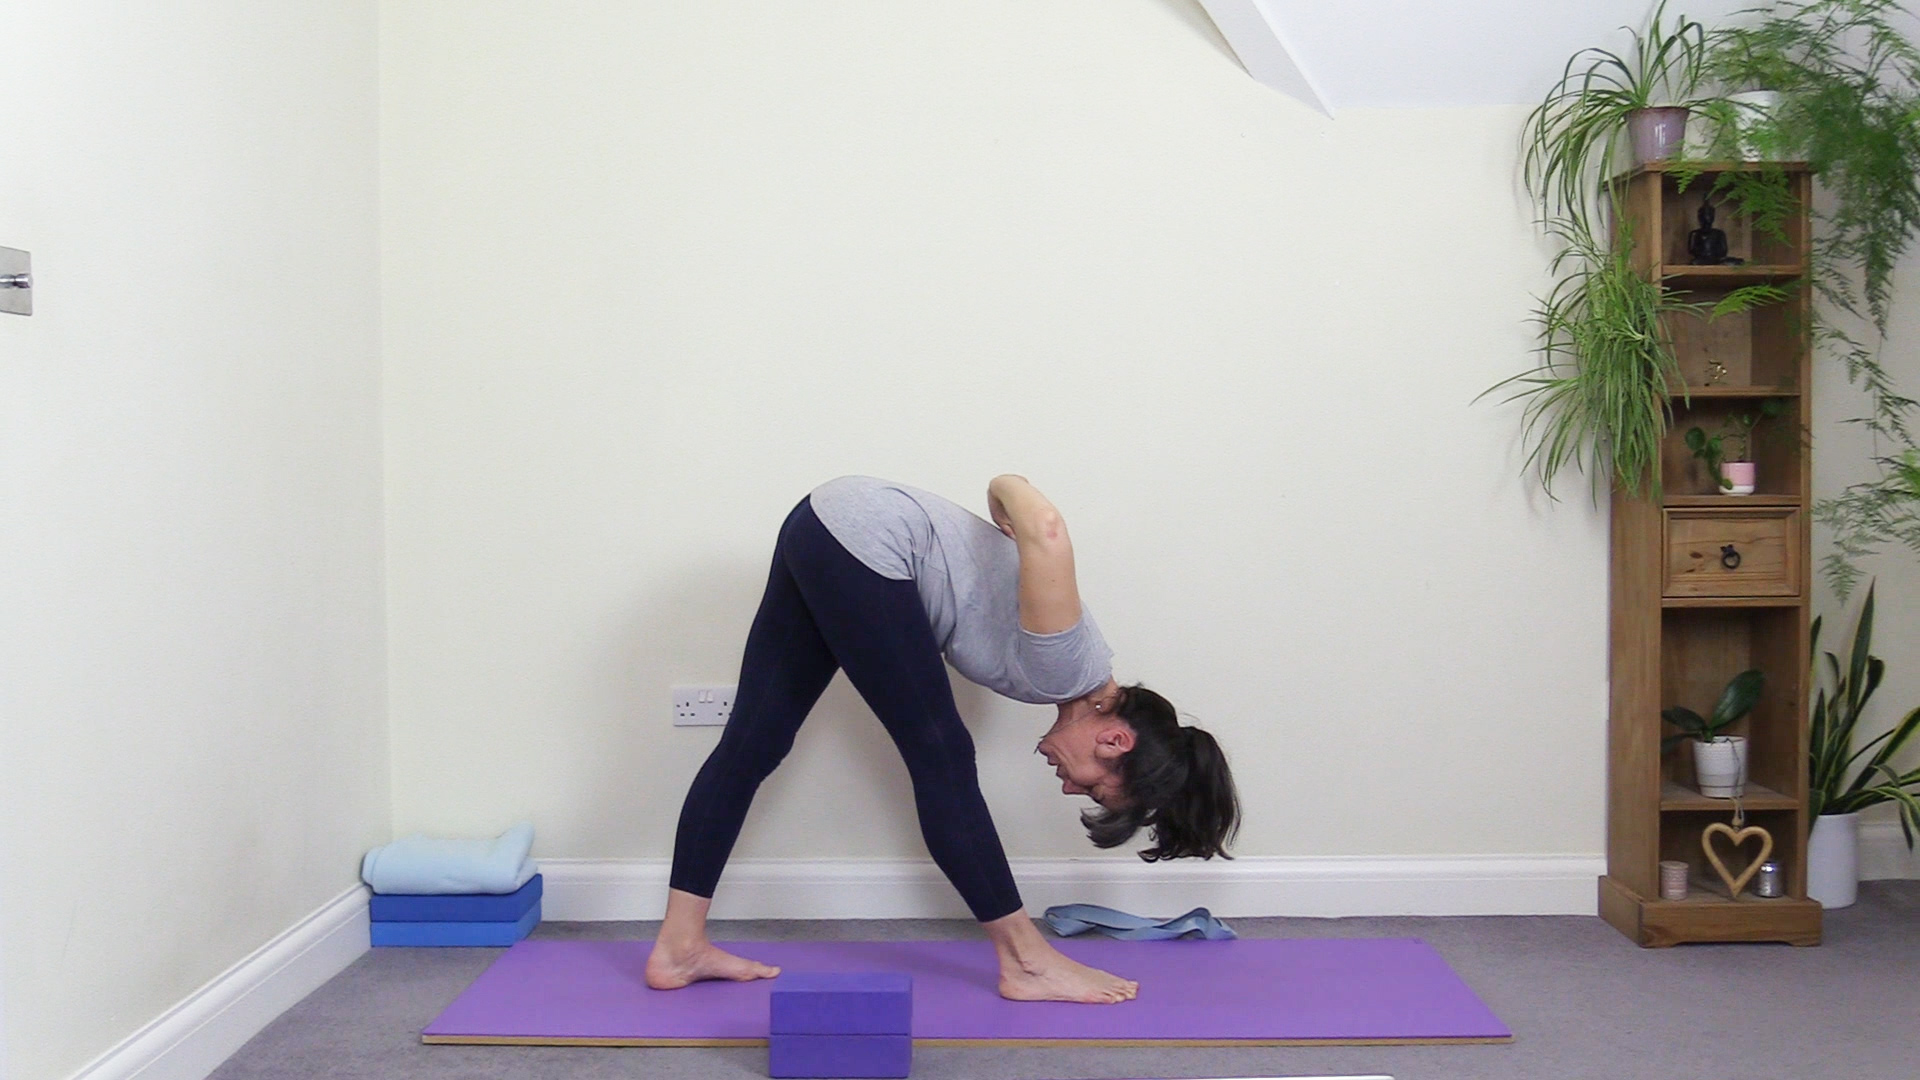 Re-Energize, Find Greater Joy: A Home Yoga Practice w/ Alanna Kaivalya